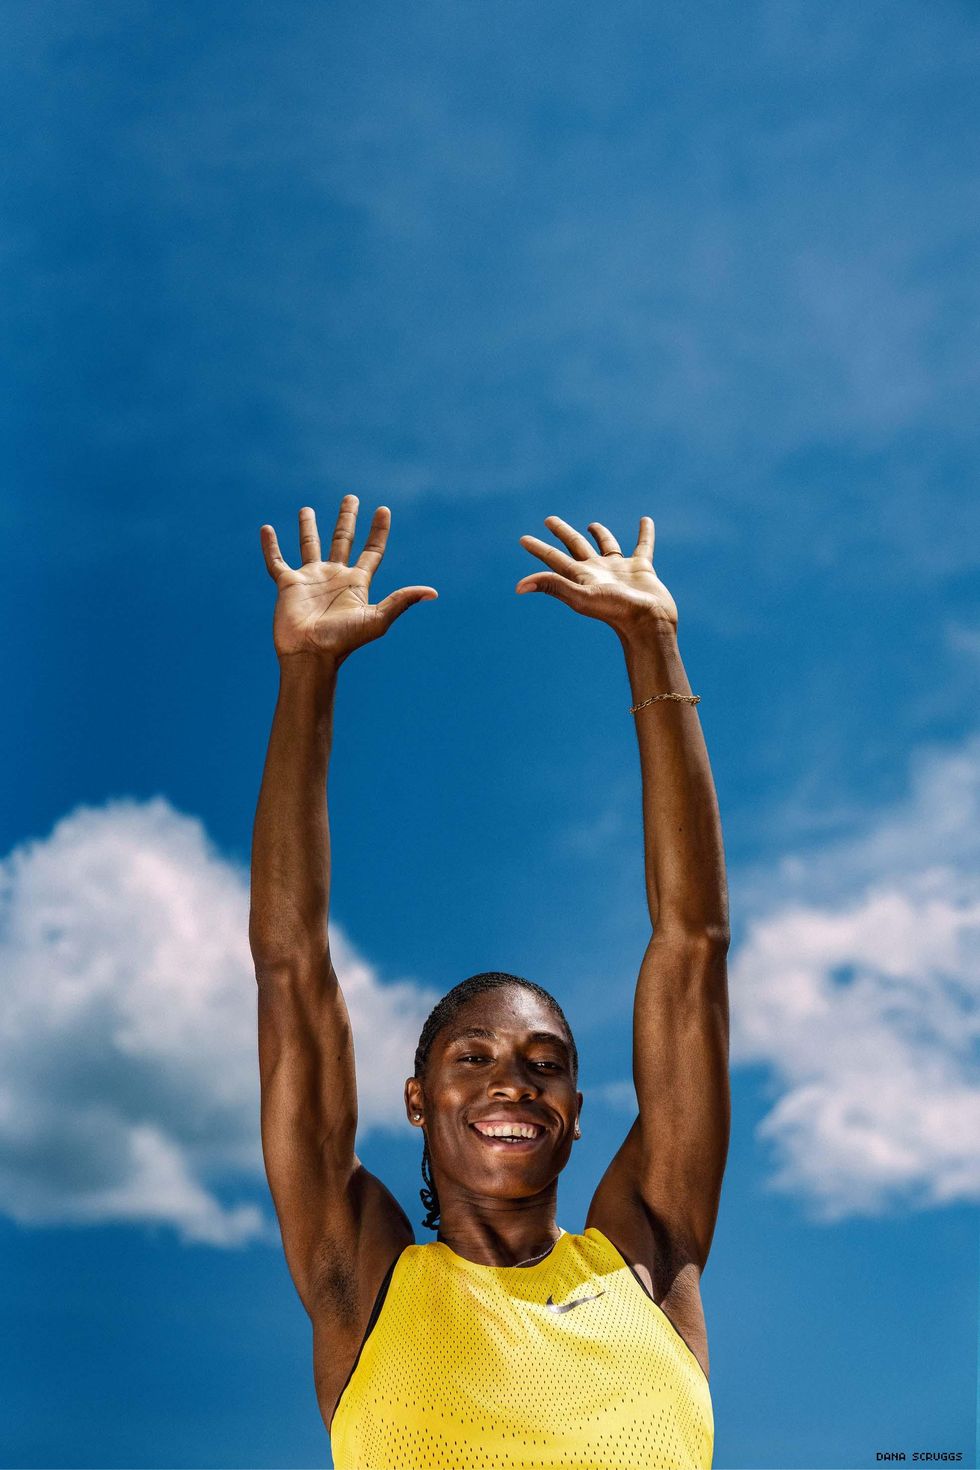 Ebony Nude Beach Miami - Our Cover Star, Caster Semenya: The Athlete in the Fight of Her Life